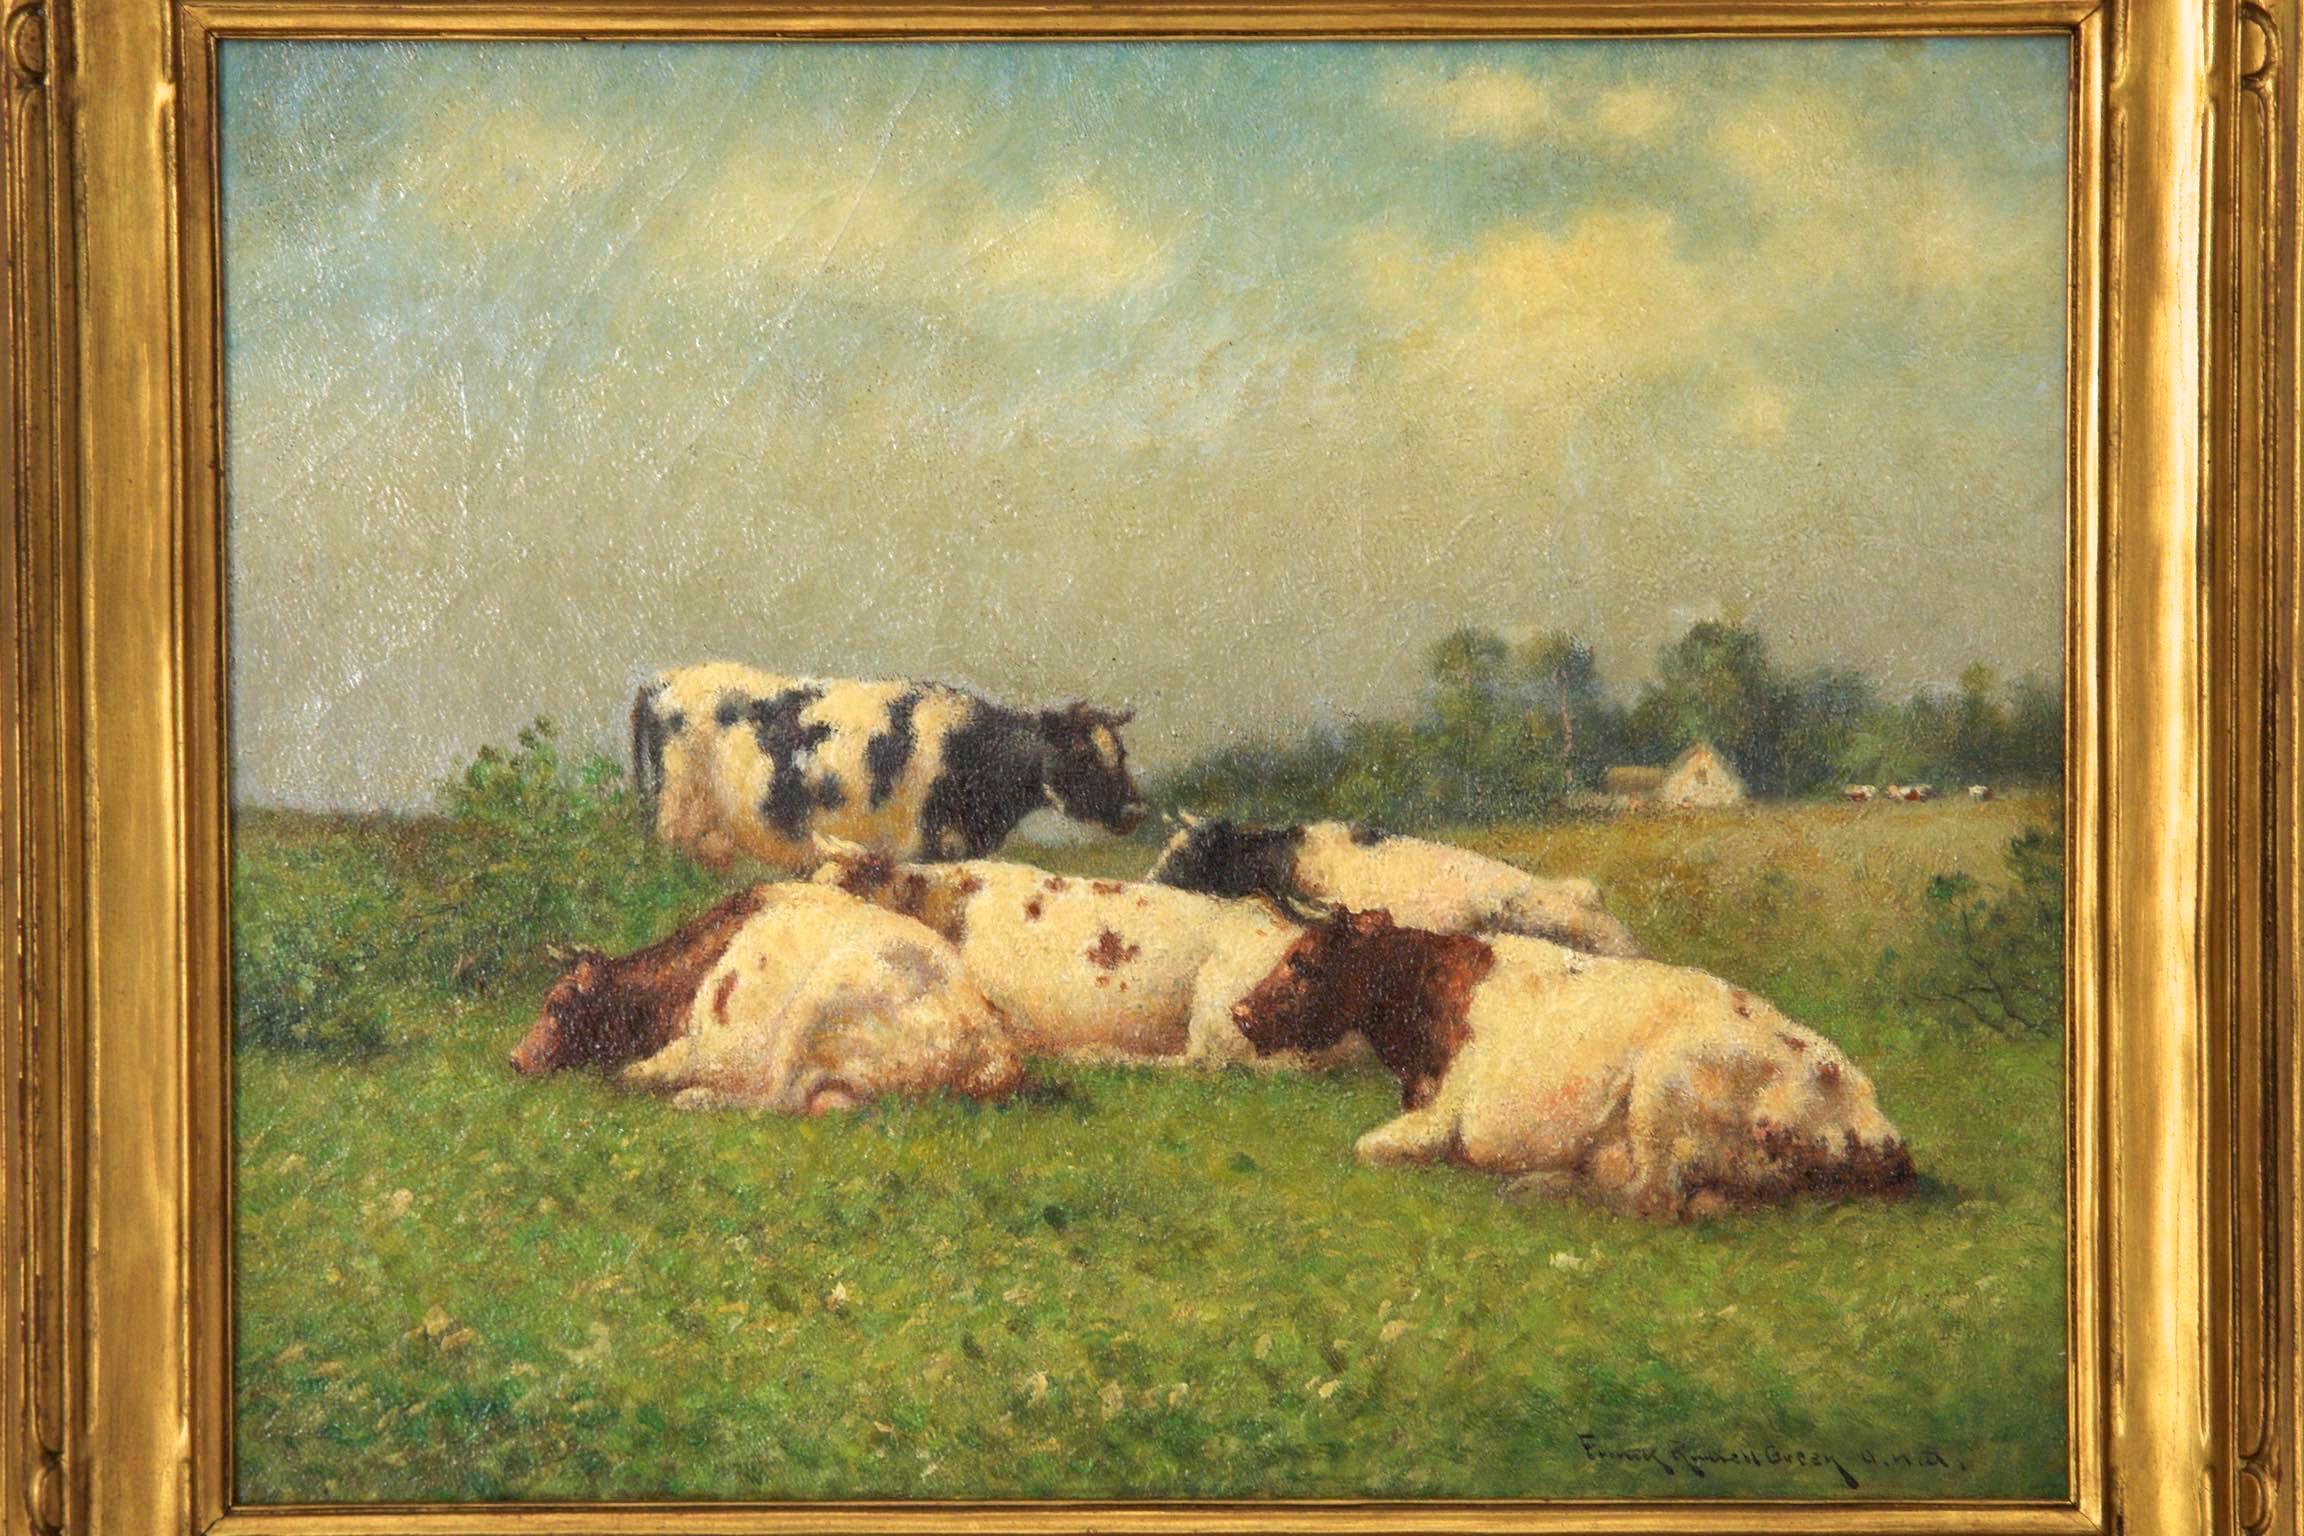 A fine pastoral landscape by Frank Russell Green, it depicts several resting cows in a green pasture before a small farmhouse in the distance. The brush work is rather intriguing with tiny strokes that create precise points of color with a bleary